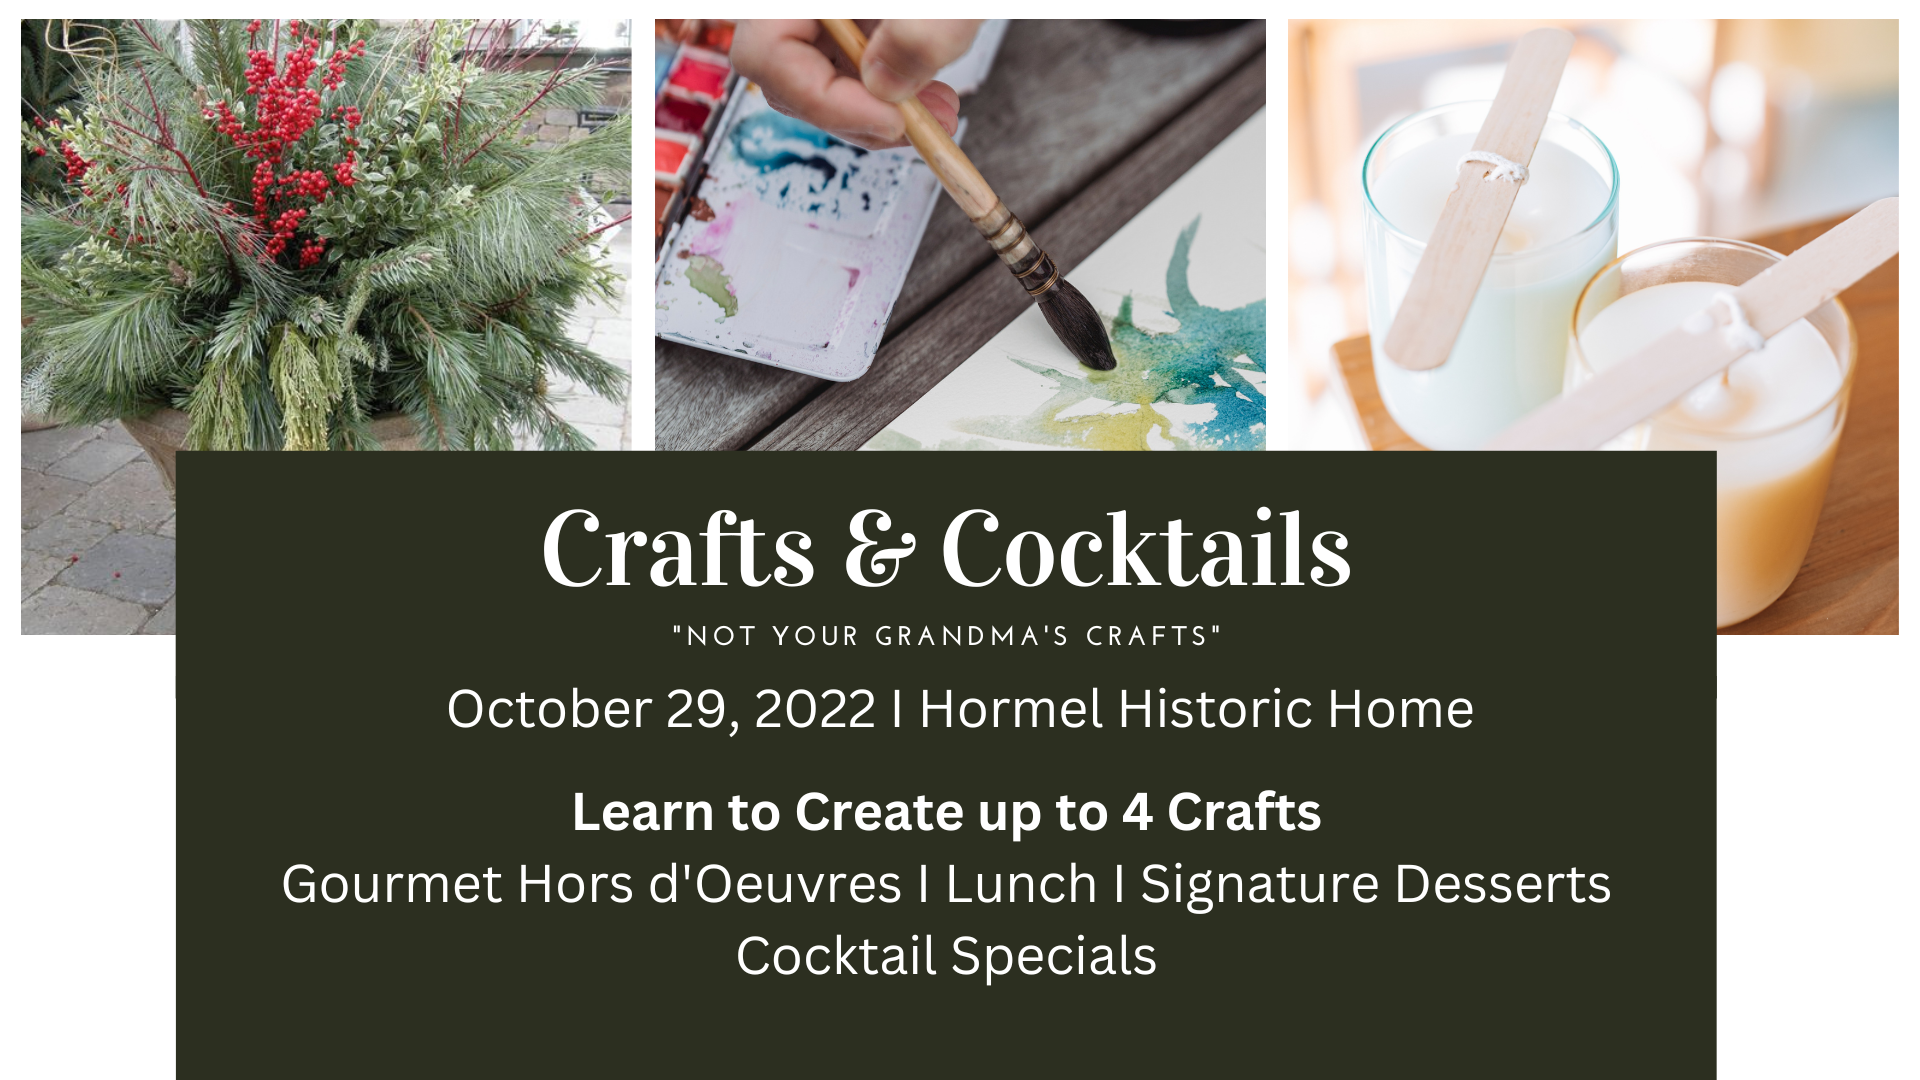 <h1 class="tribe-events-single-event-title">Crafts & Cocktails promises a day of inspiration and fun</h1>